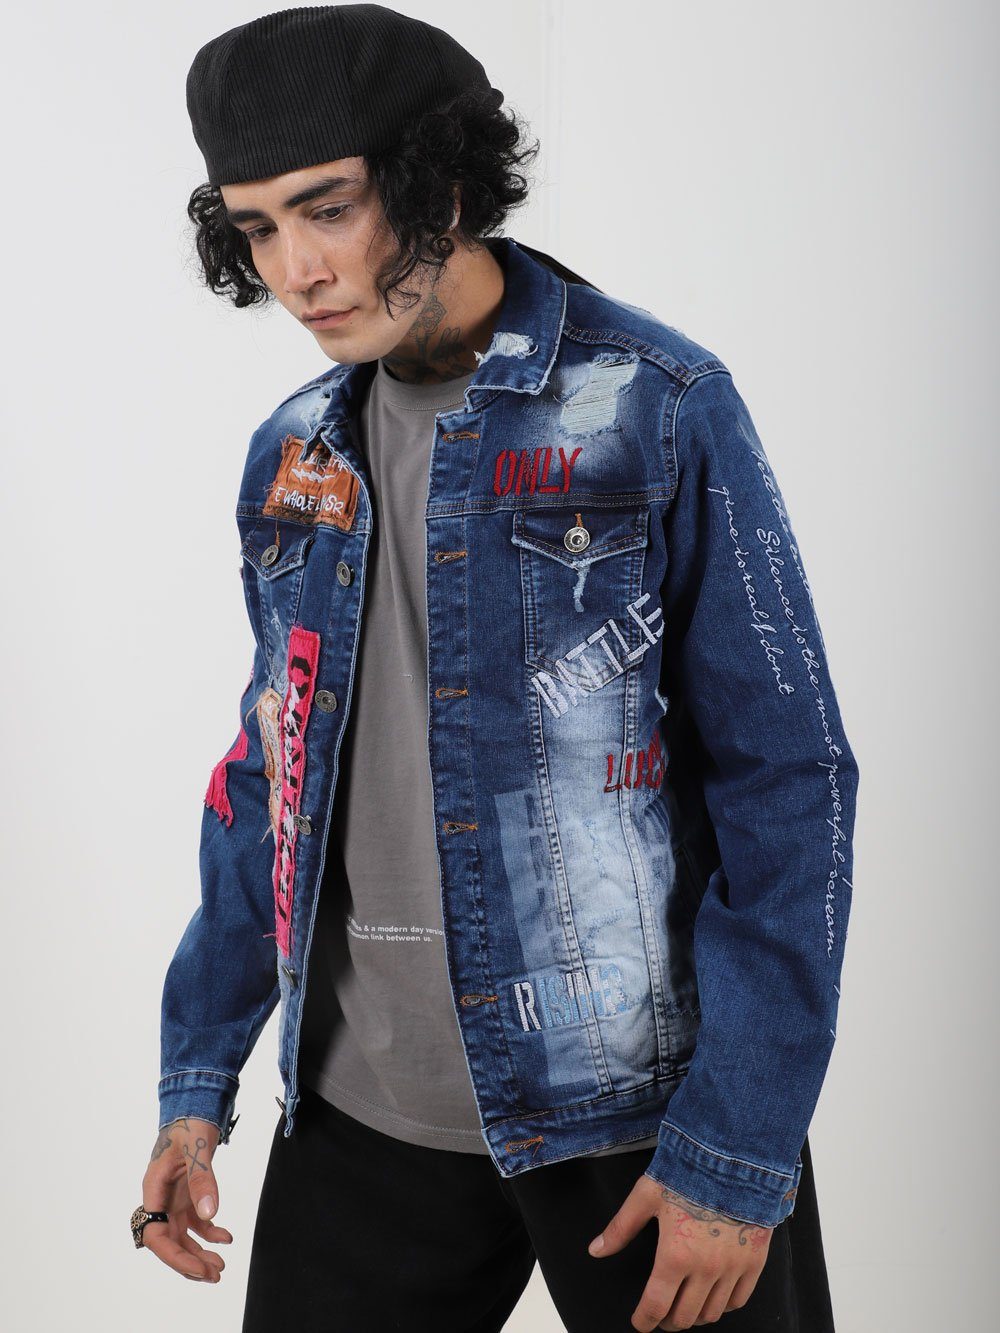 A man wearing THE VETERAN denim jacket with patches on it.